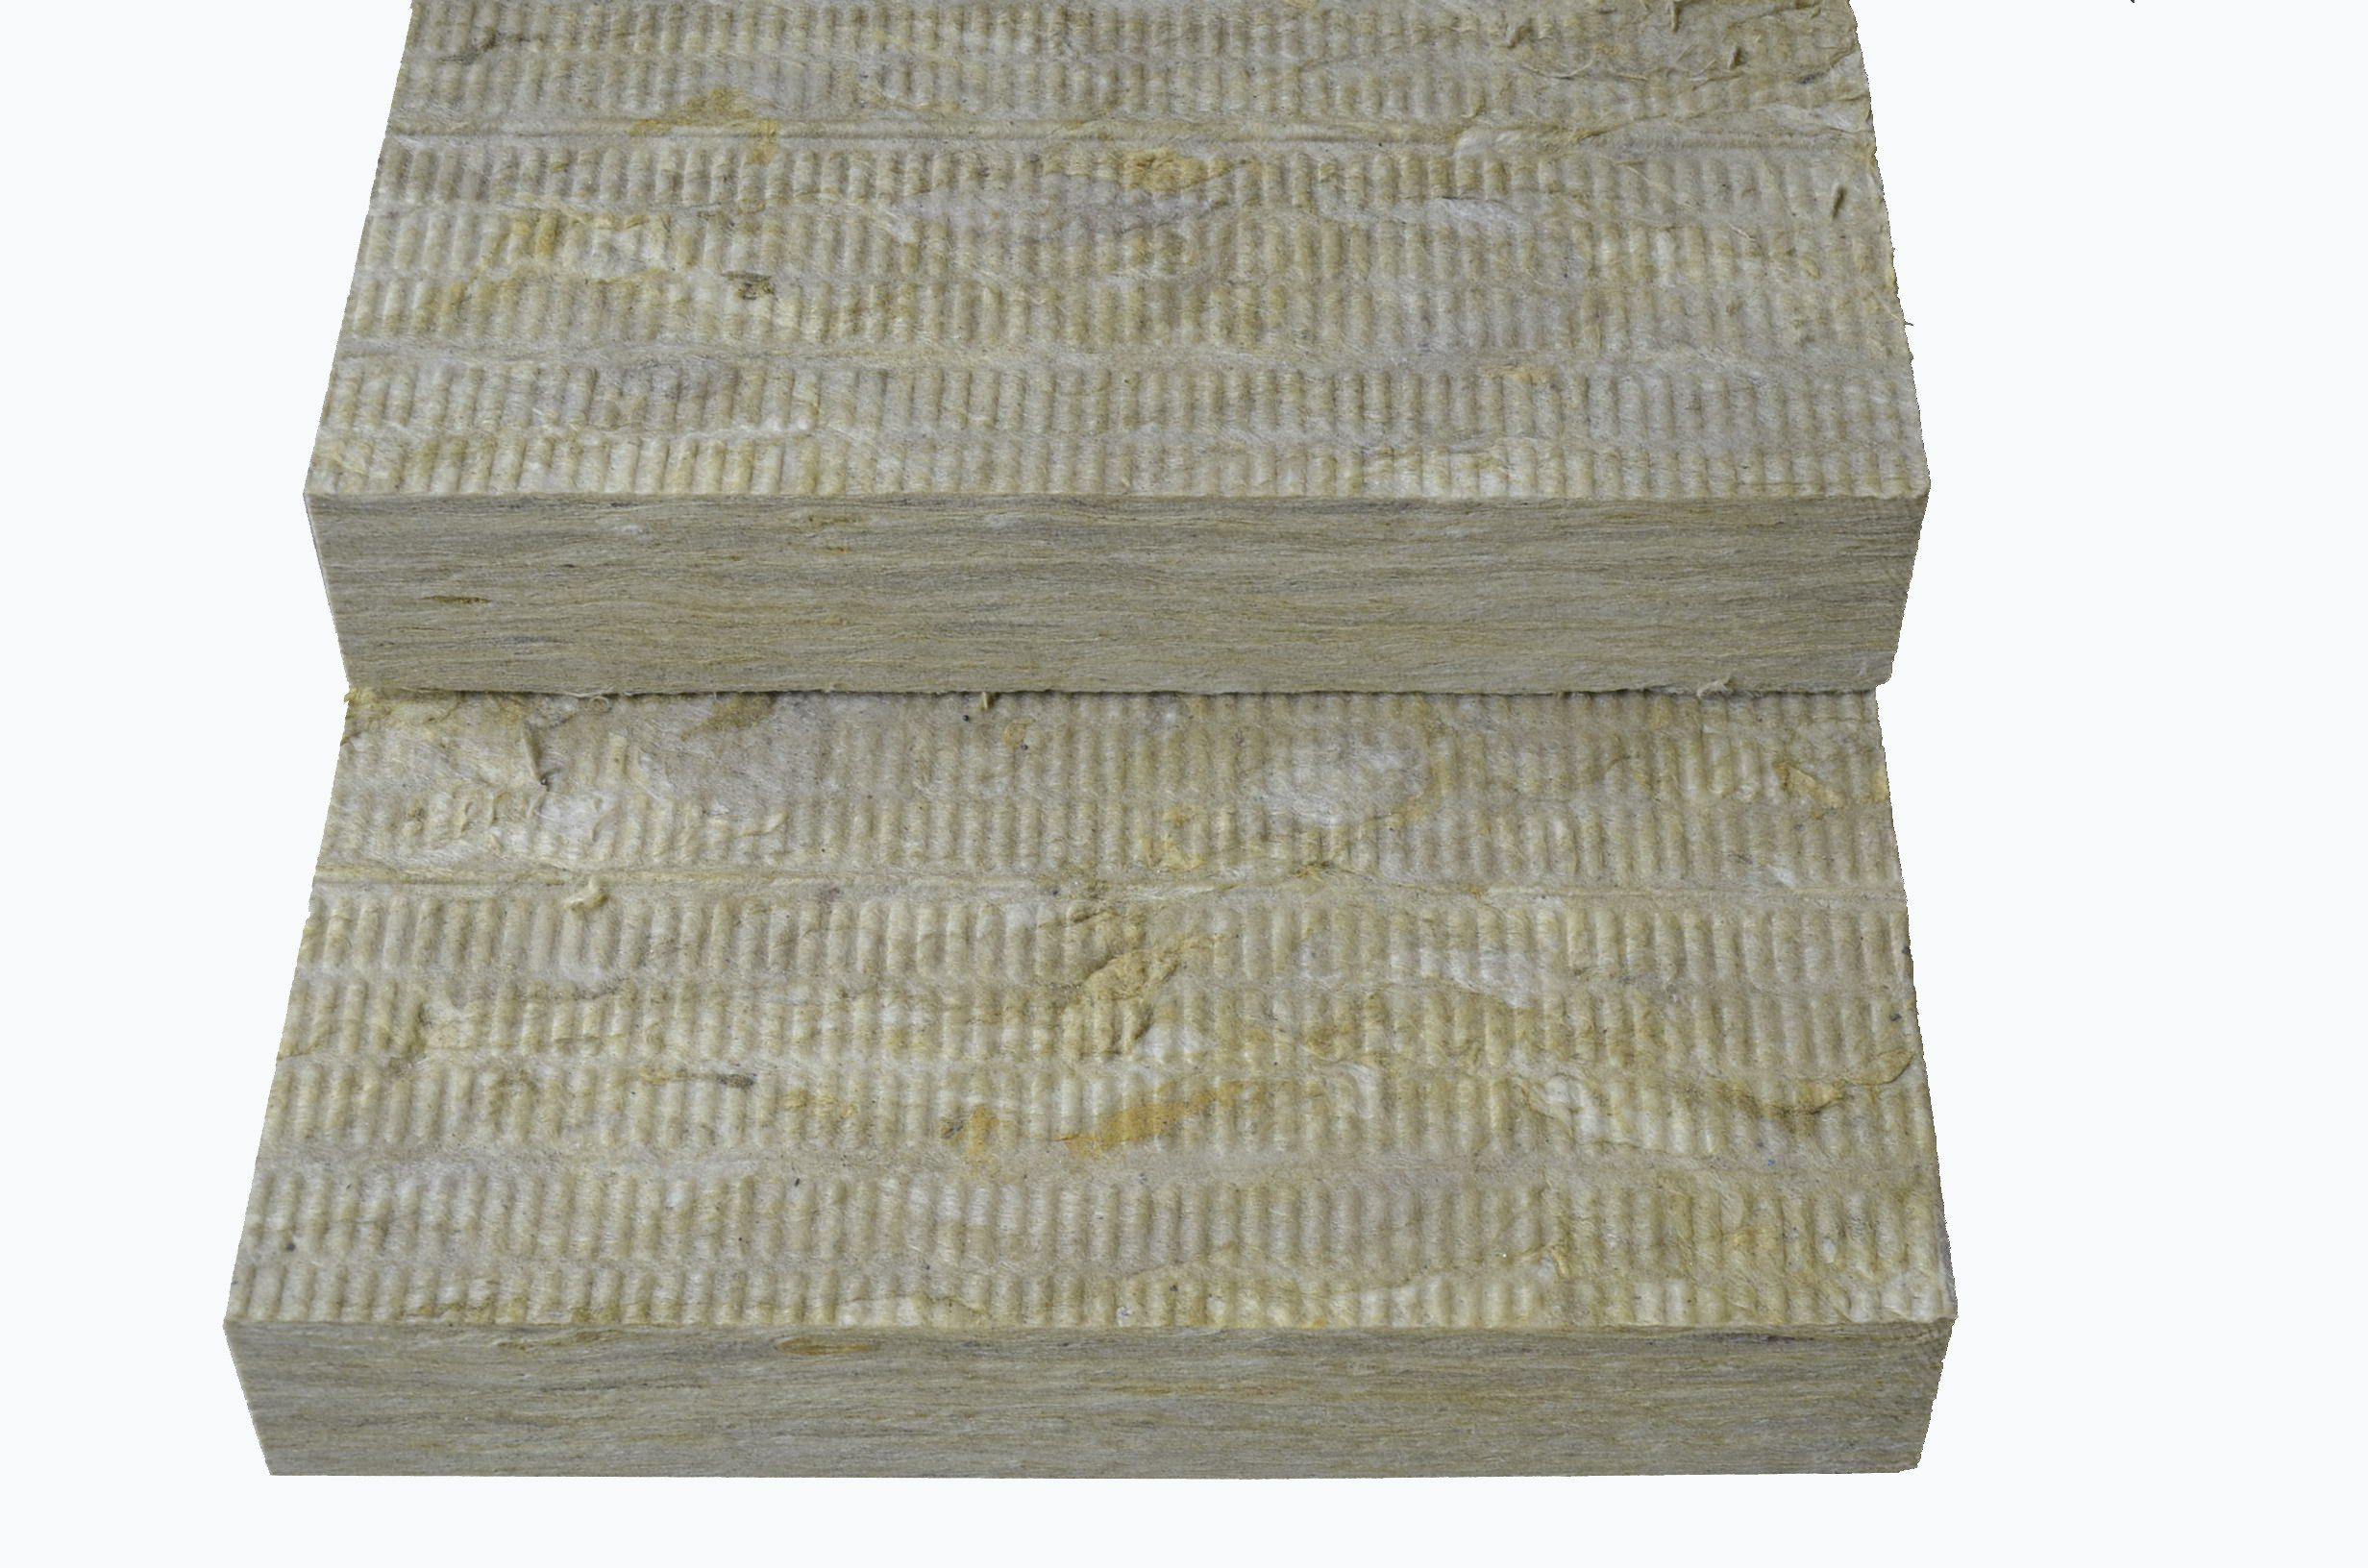 Thermal Insulation Rockwool Board 600mm Width For Exhaust Flues , Boilers